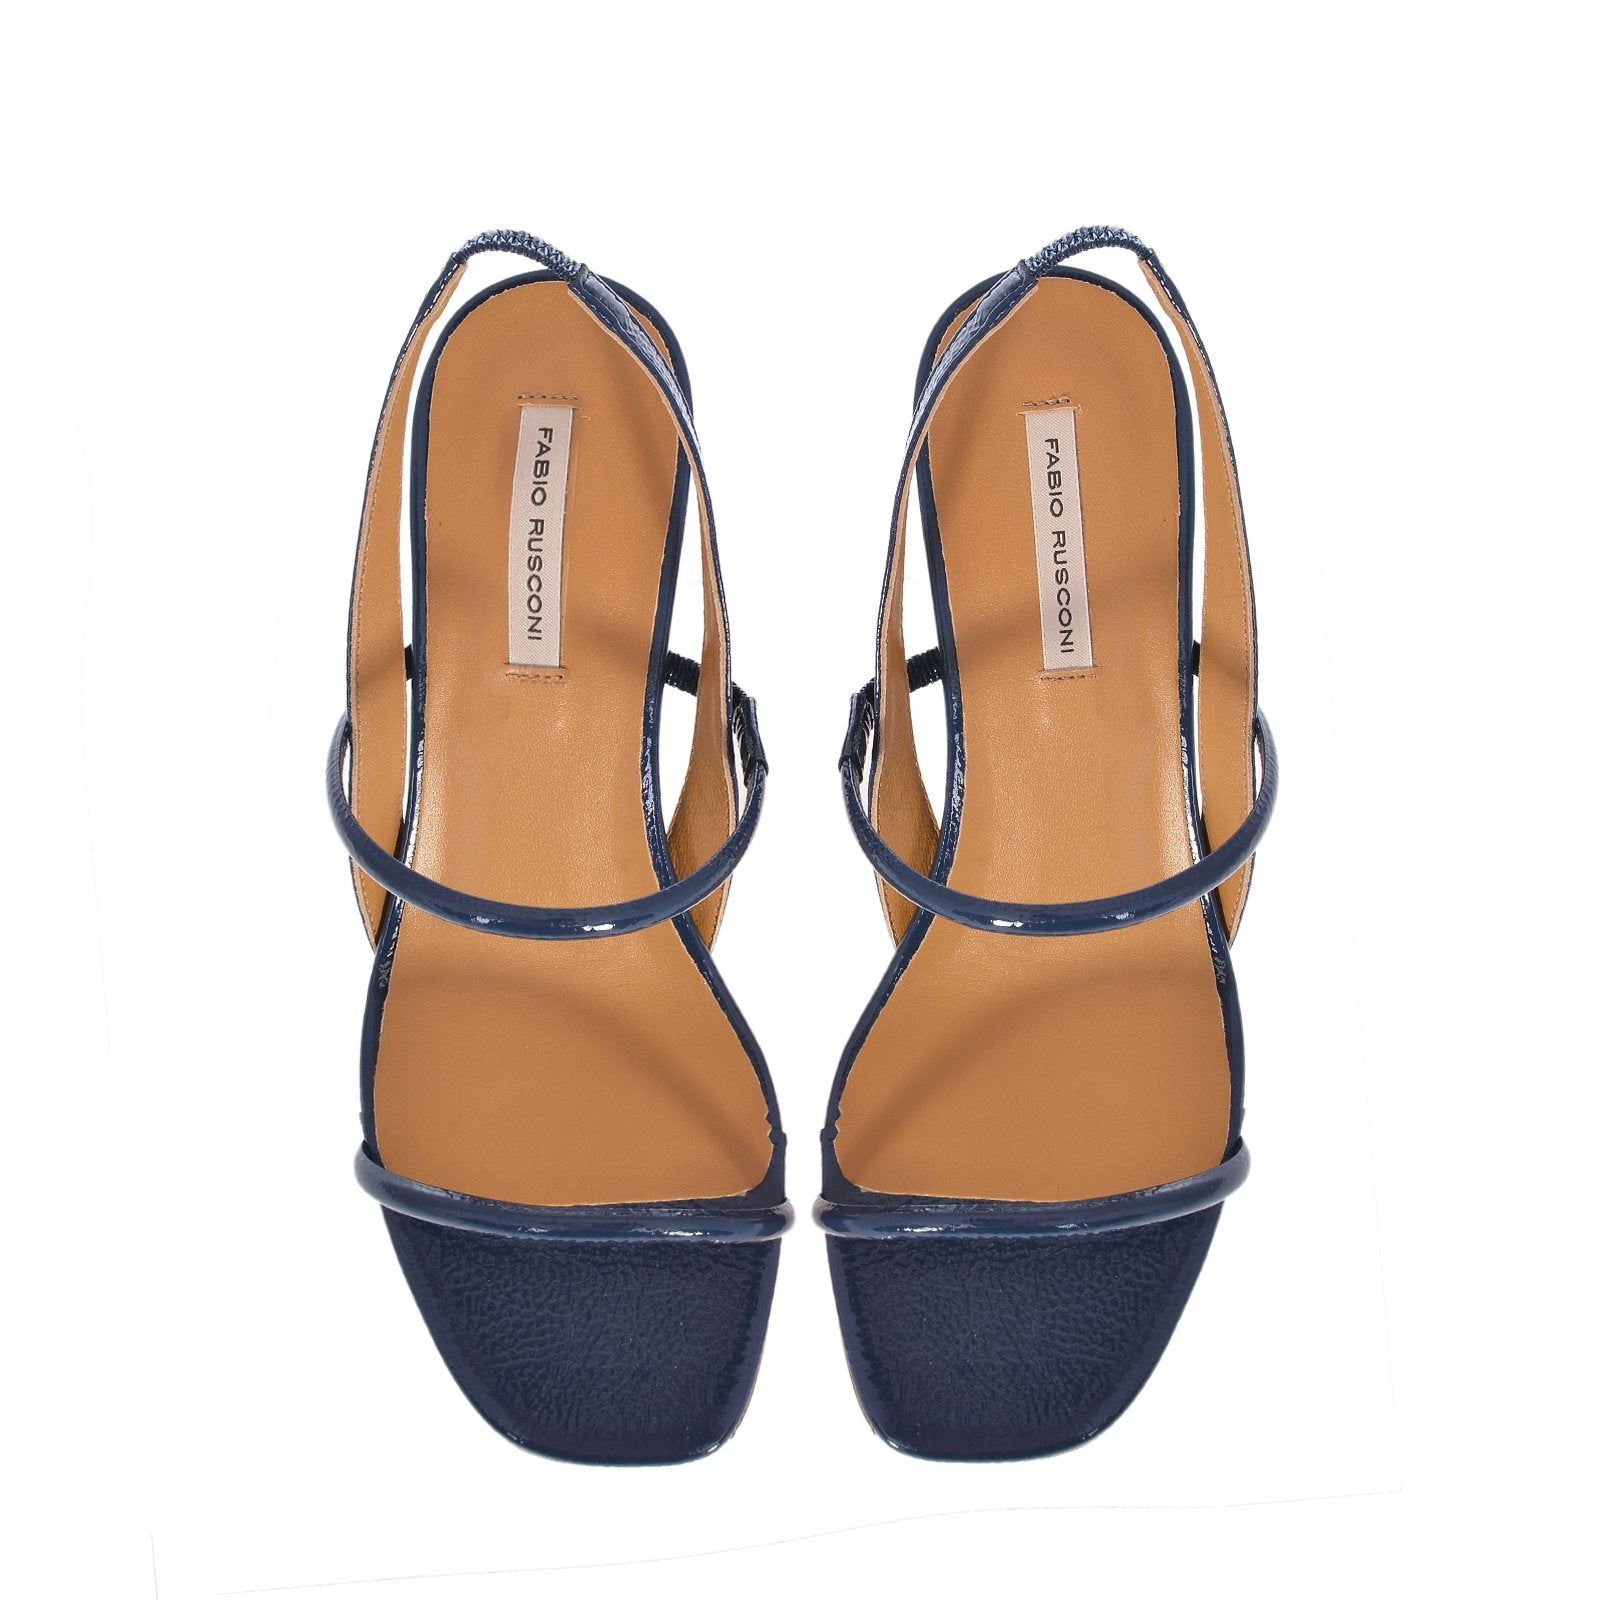 Iside Navy Naplack Leather Sandals NAVY87735 - 4